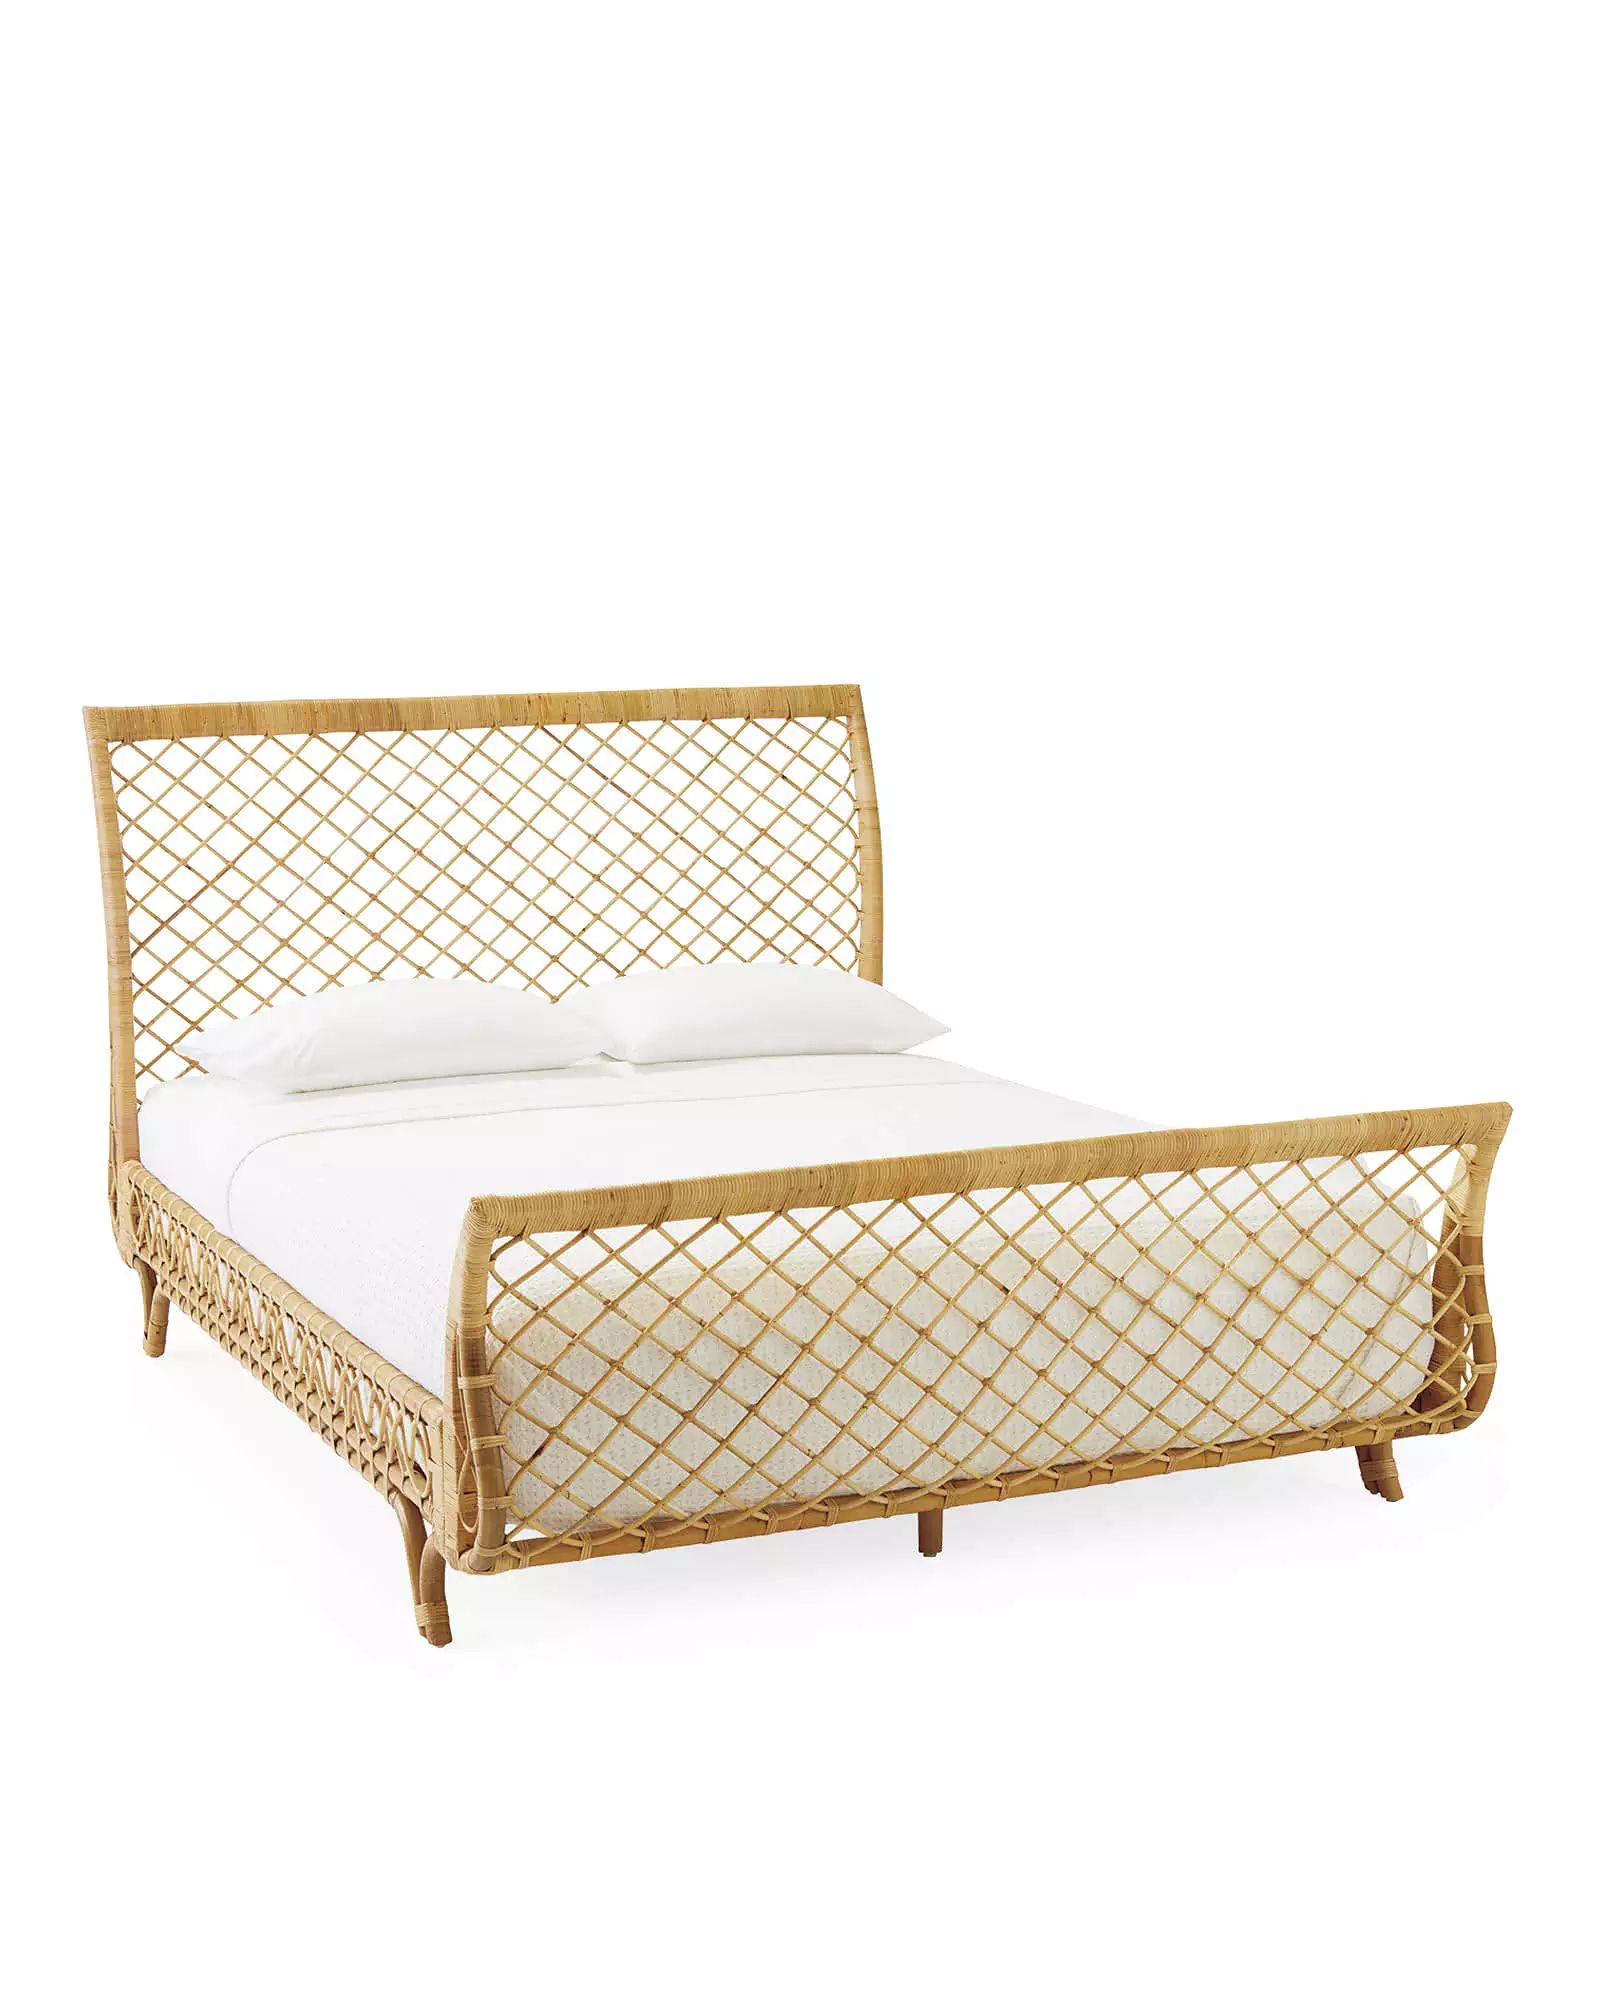 Avalon Bed with Footboard | Serena and Lily